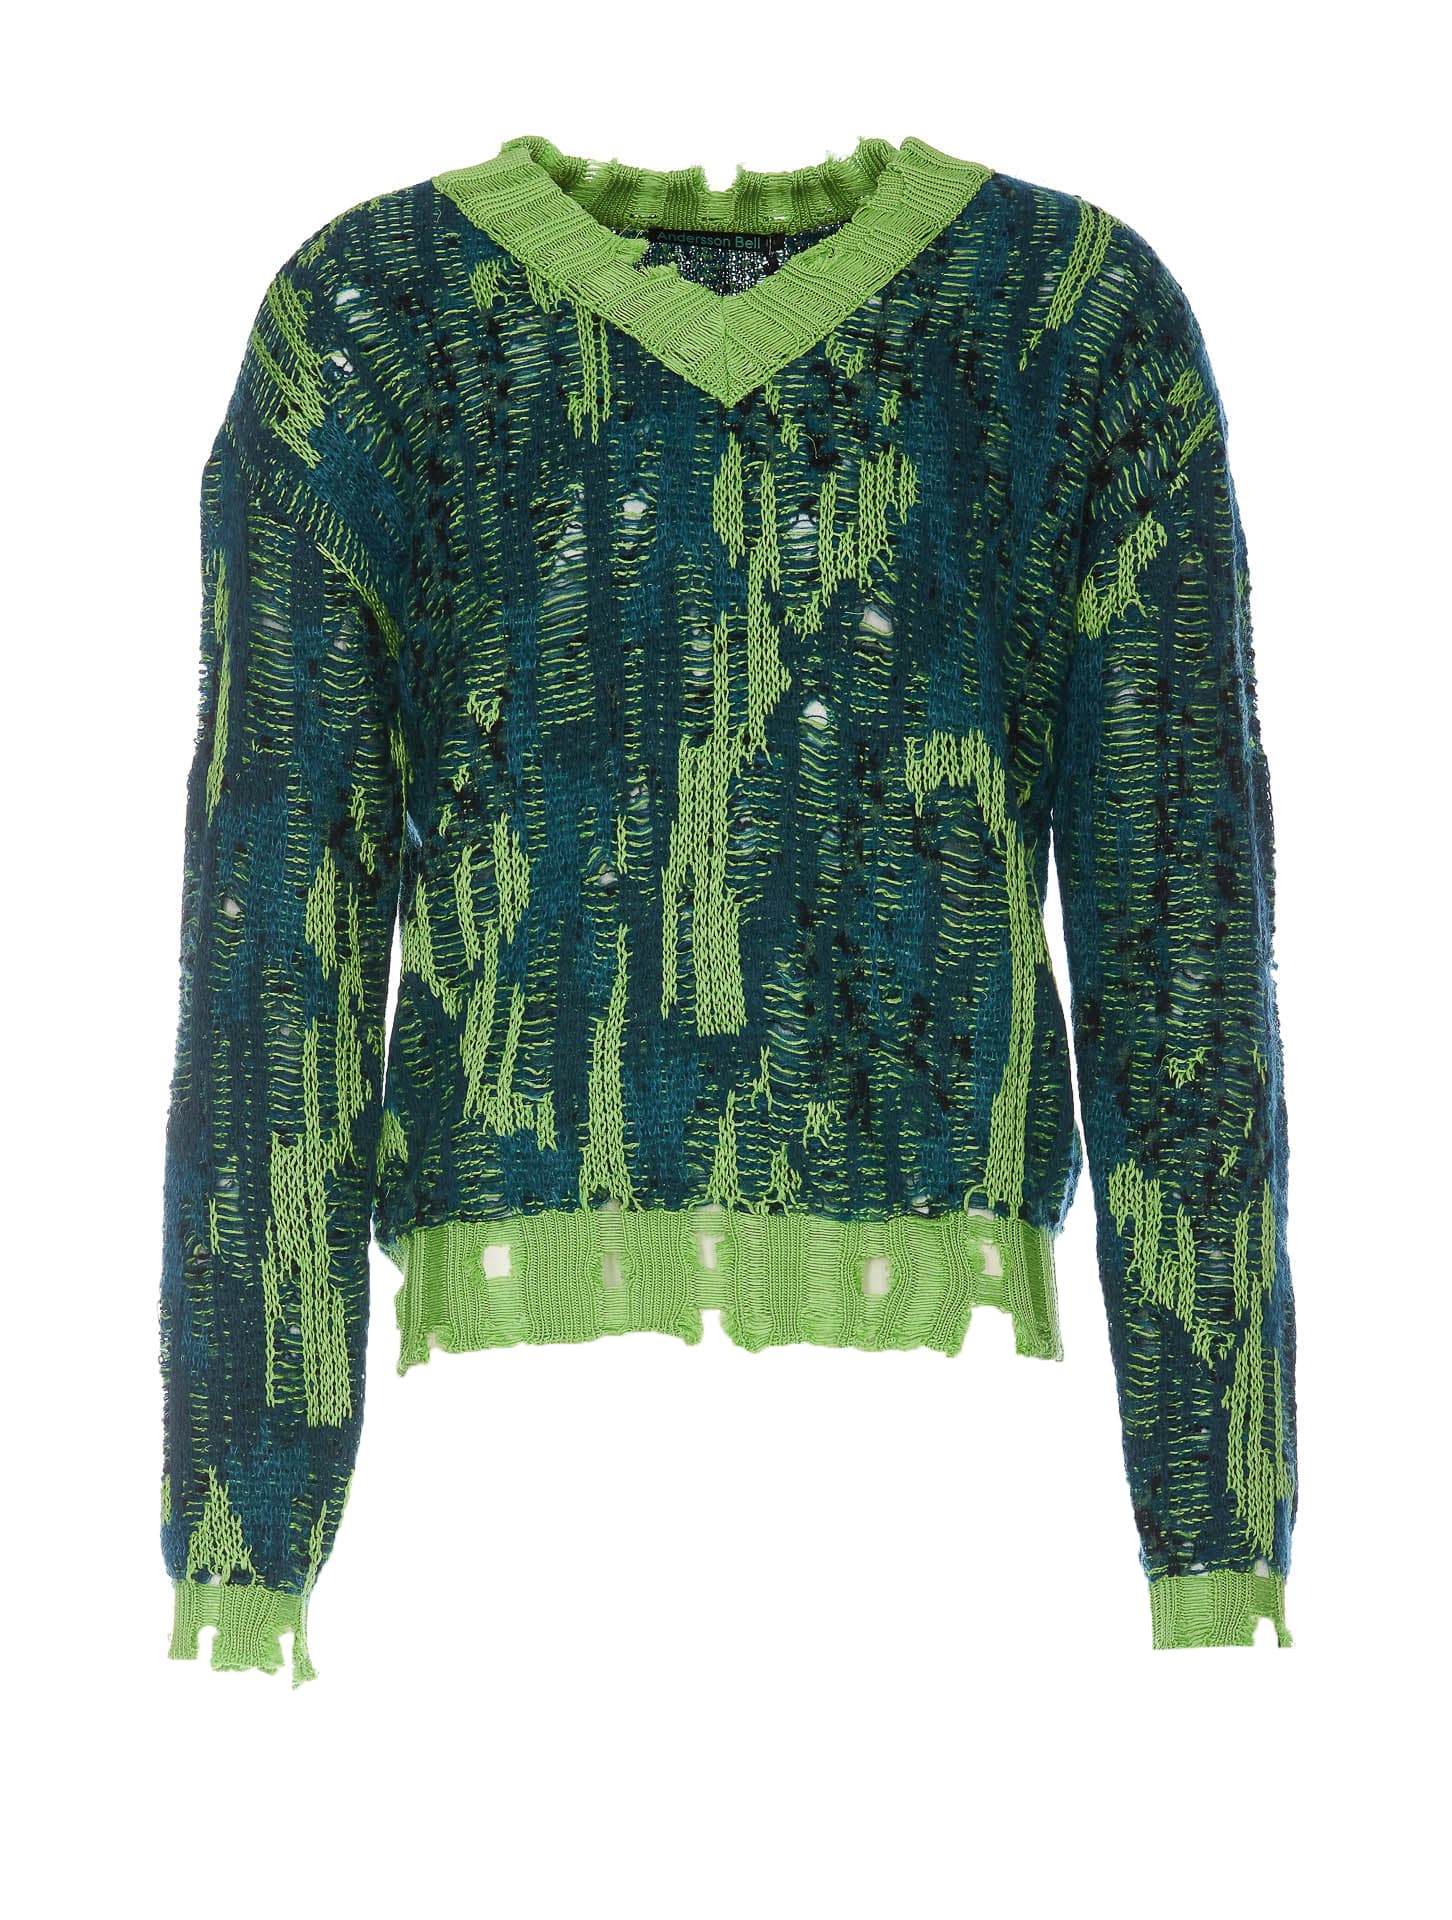 ANDERSSON BELL THEYDON SPIDER SWEATER